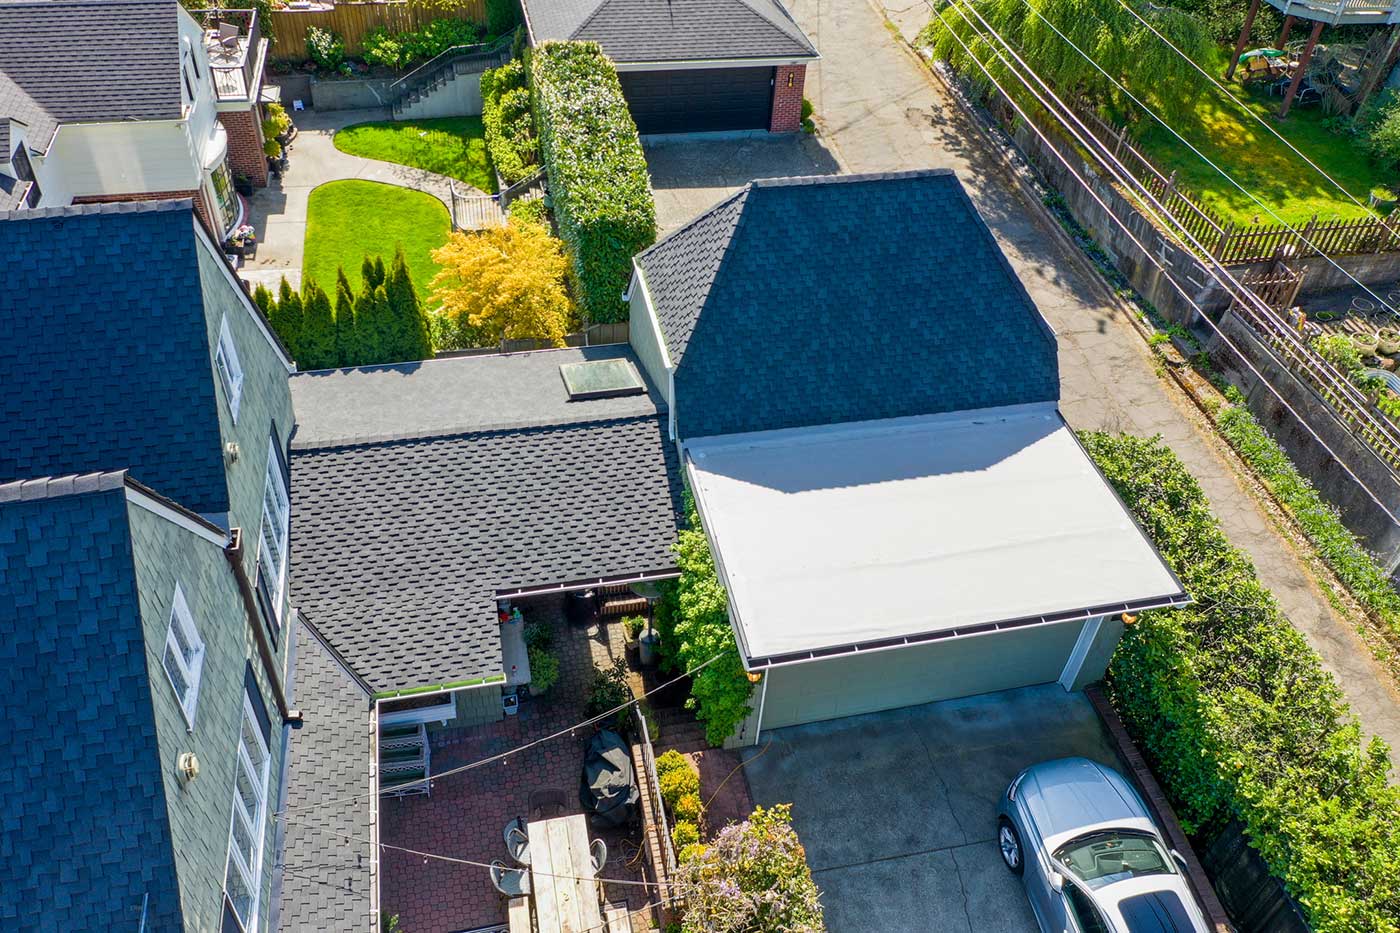 New Composite Asphalt Shingles Roof in Tacoma, Washington: close up view of garage roof